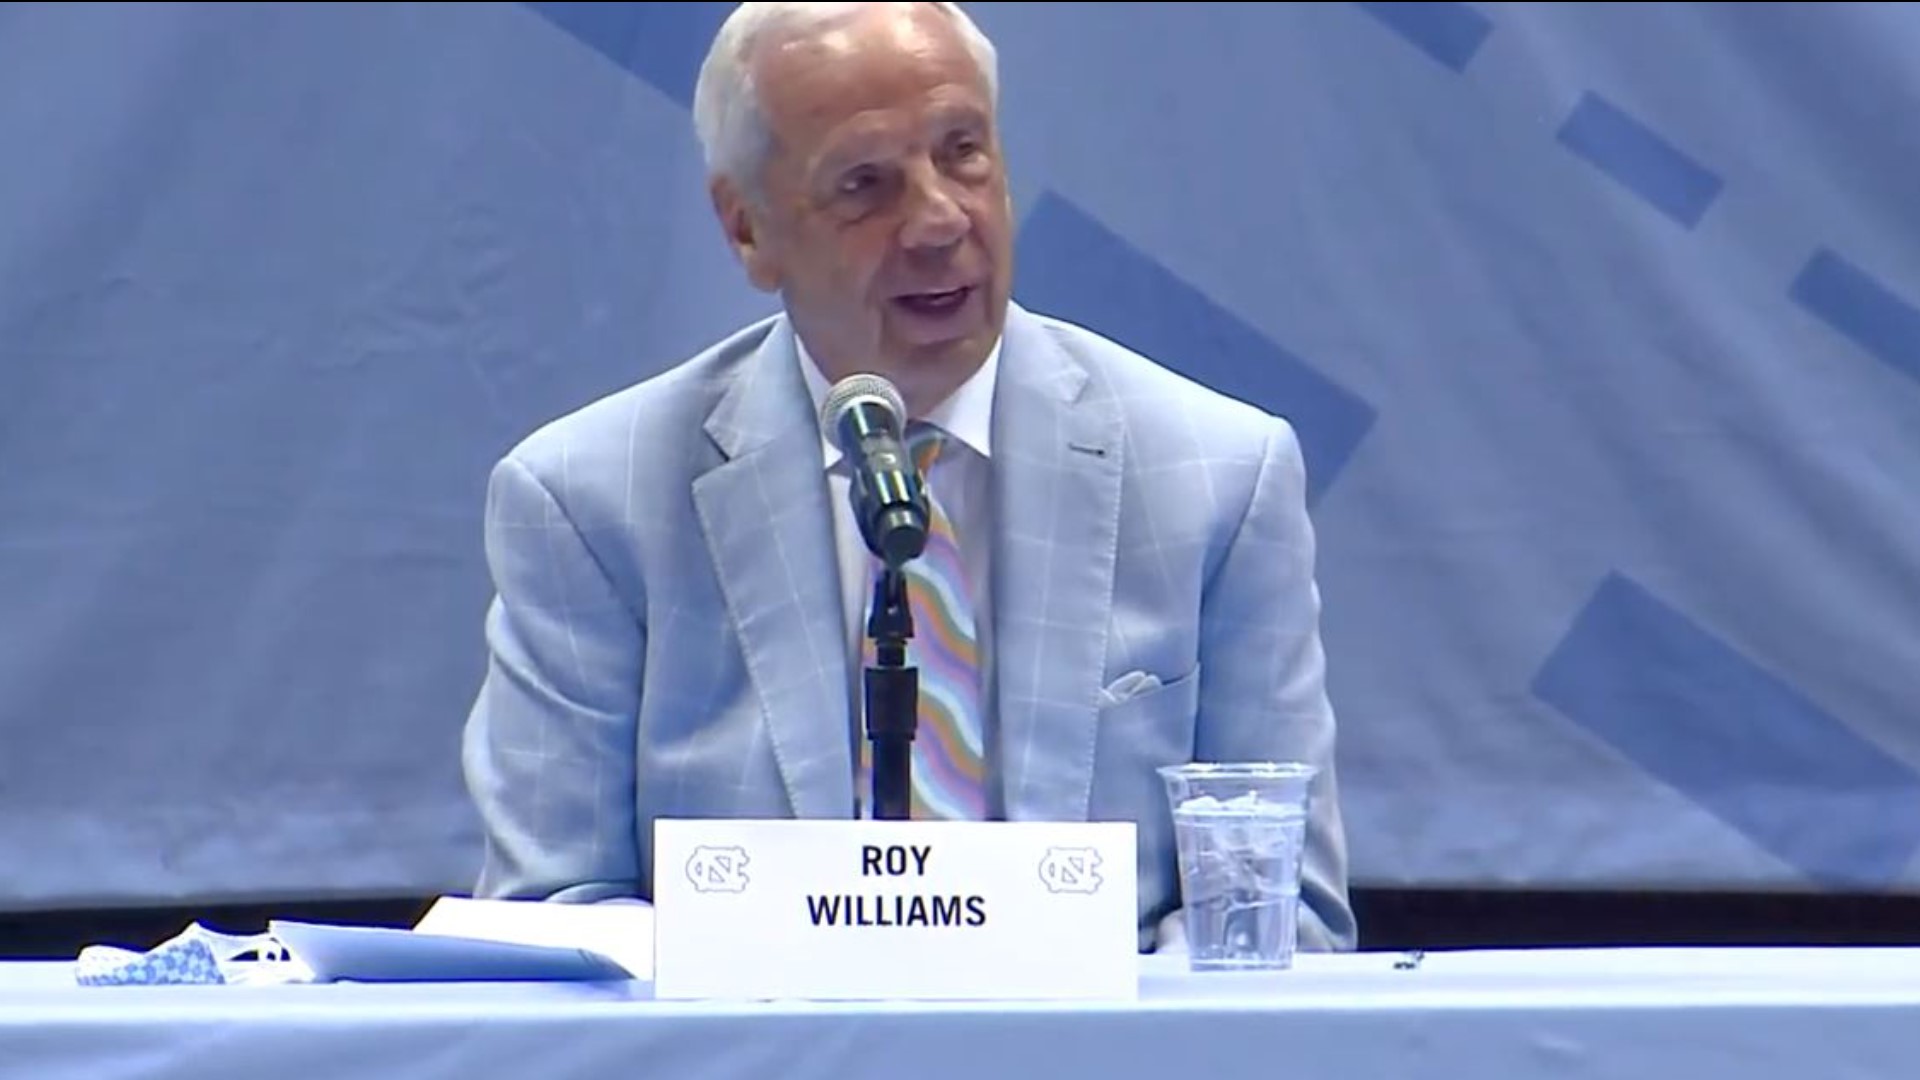 “It’s been a thrill. It’s been unbelievable. I have loved it. It’s coaching and it’s all I’ve ever wanted to do,” coach Roy Williams said.